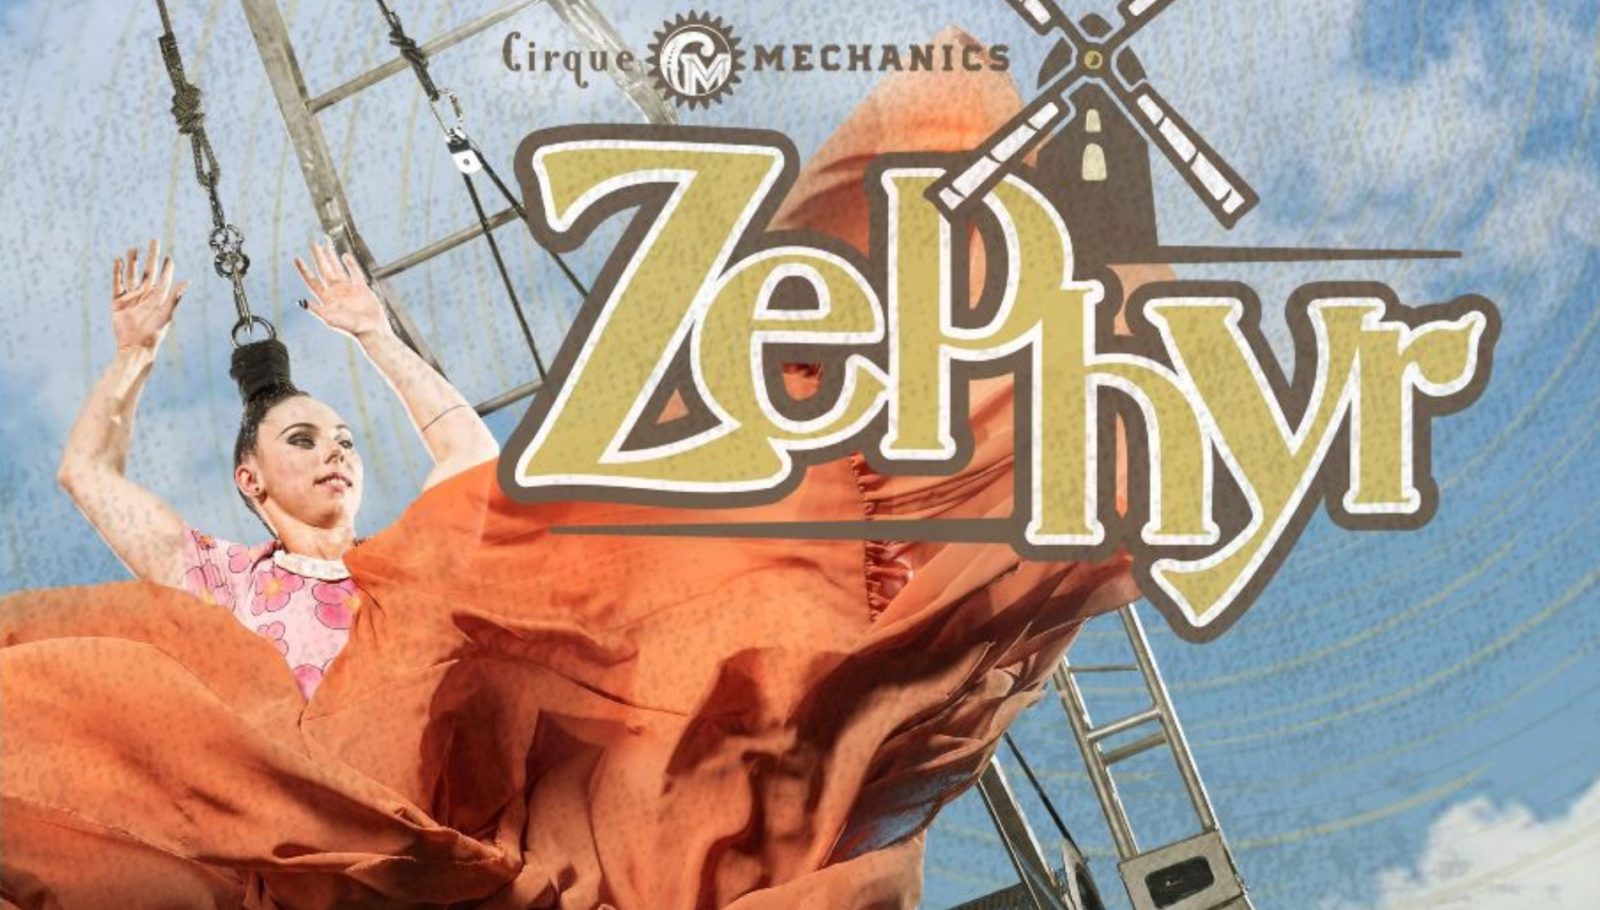 Promotional poster of Zephyr, the newest show from Cirque Mechanics, shows a female hair hang performer suspended from stage machinery in a billowy dress